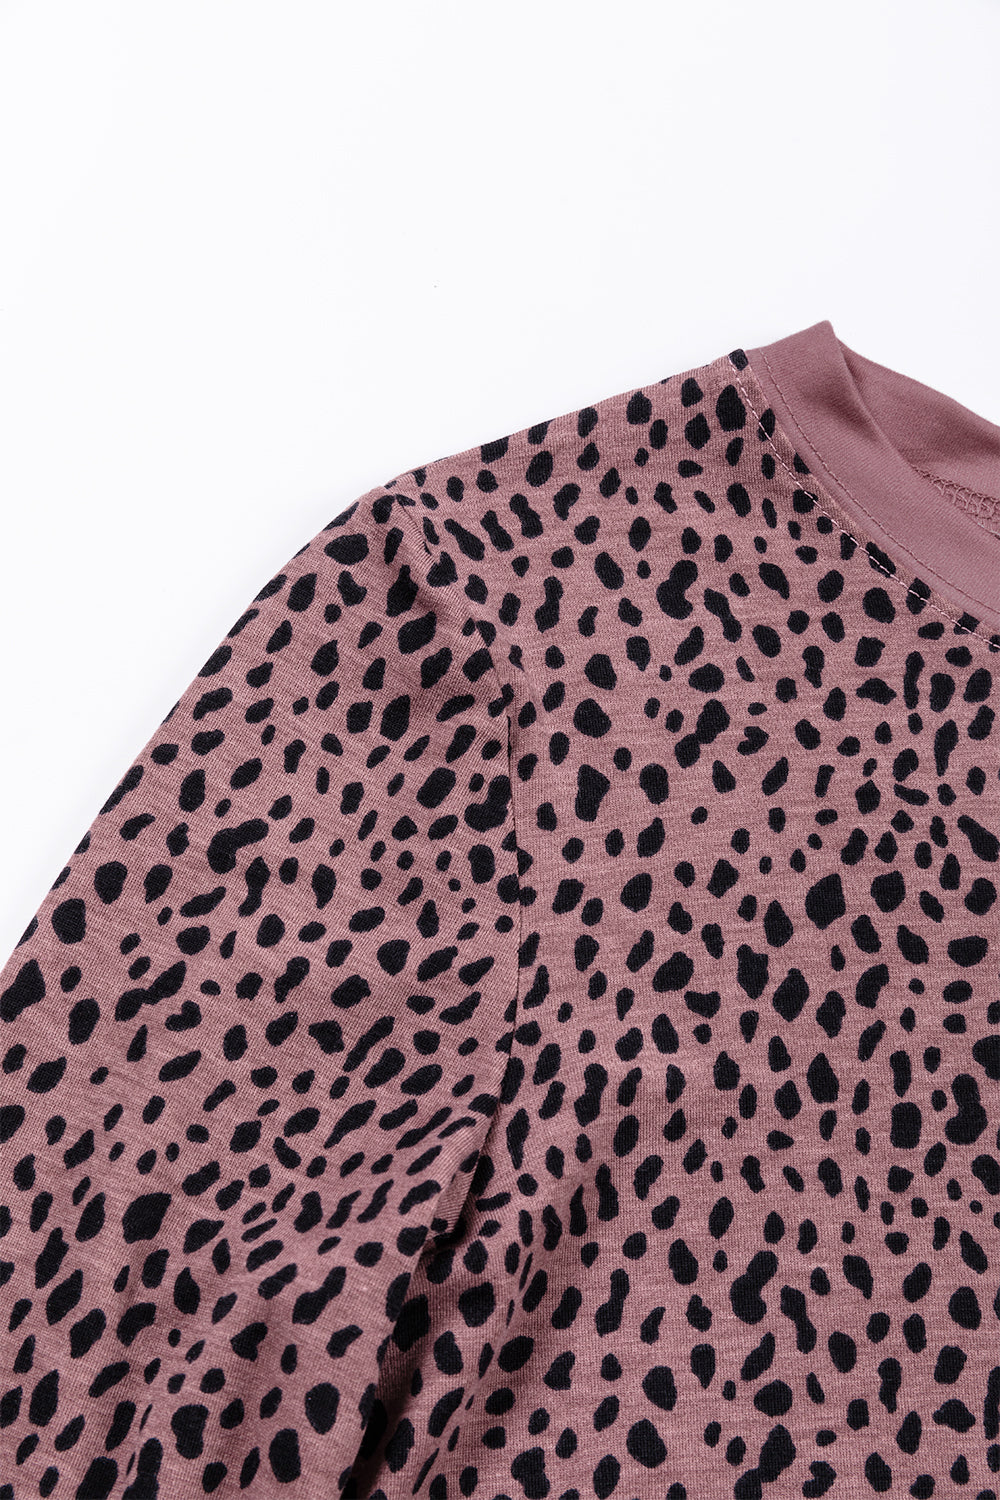 Animal Spotted Print Round Neck Long Sleeve Top